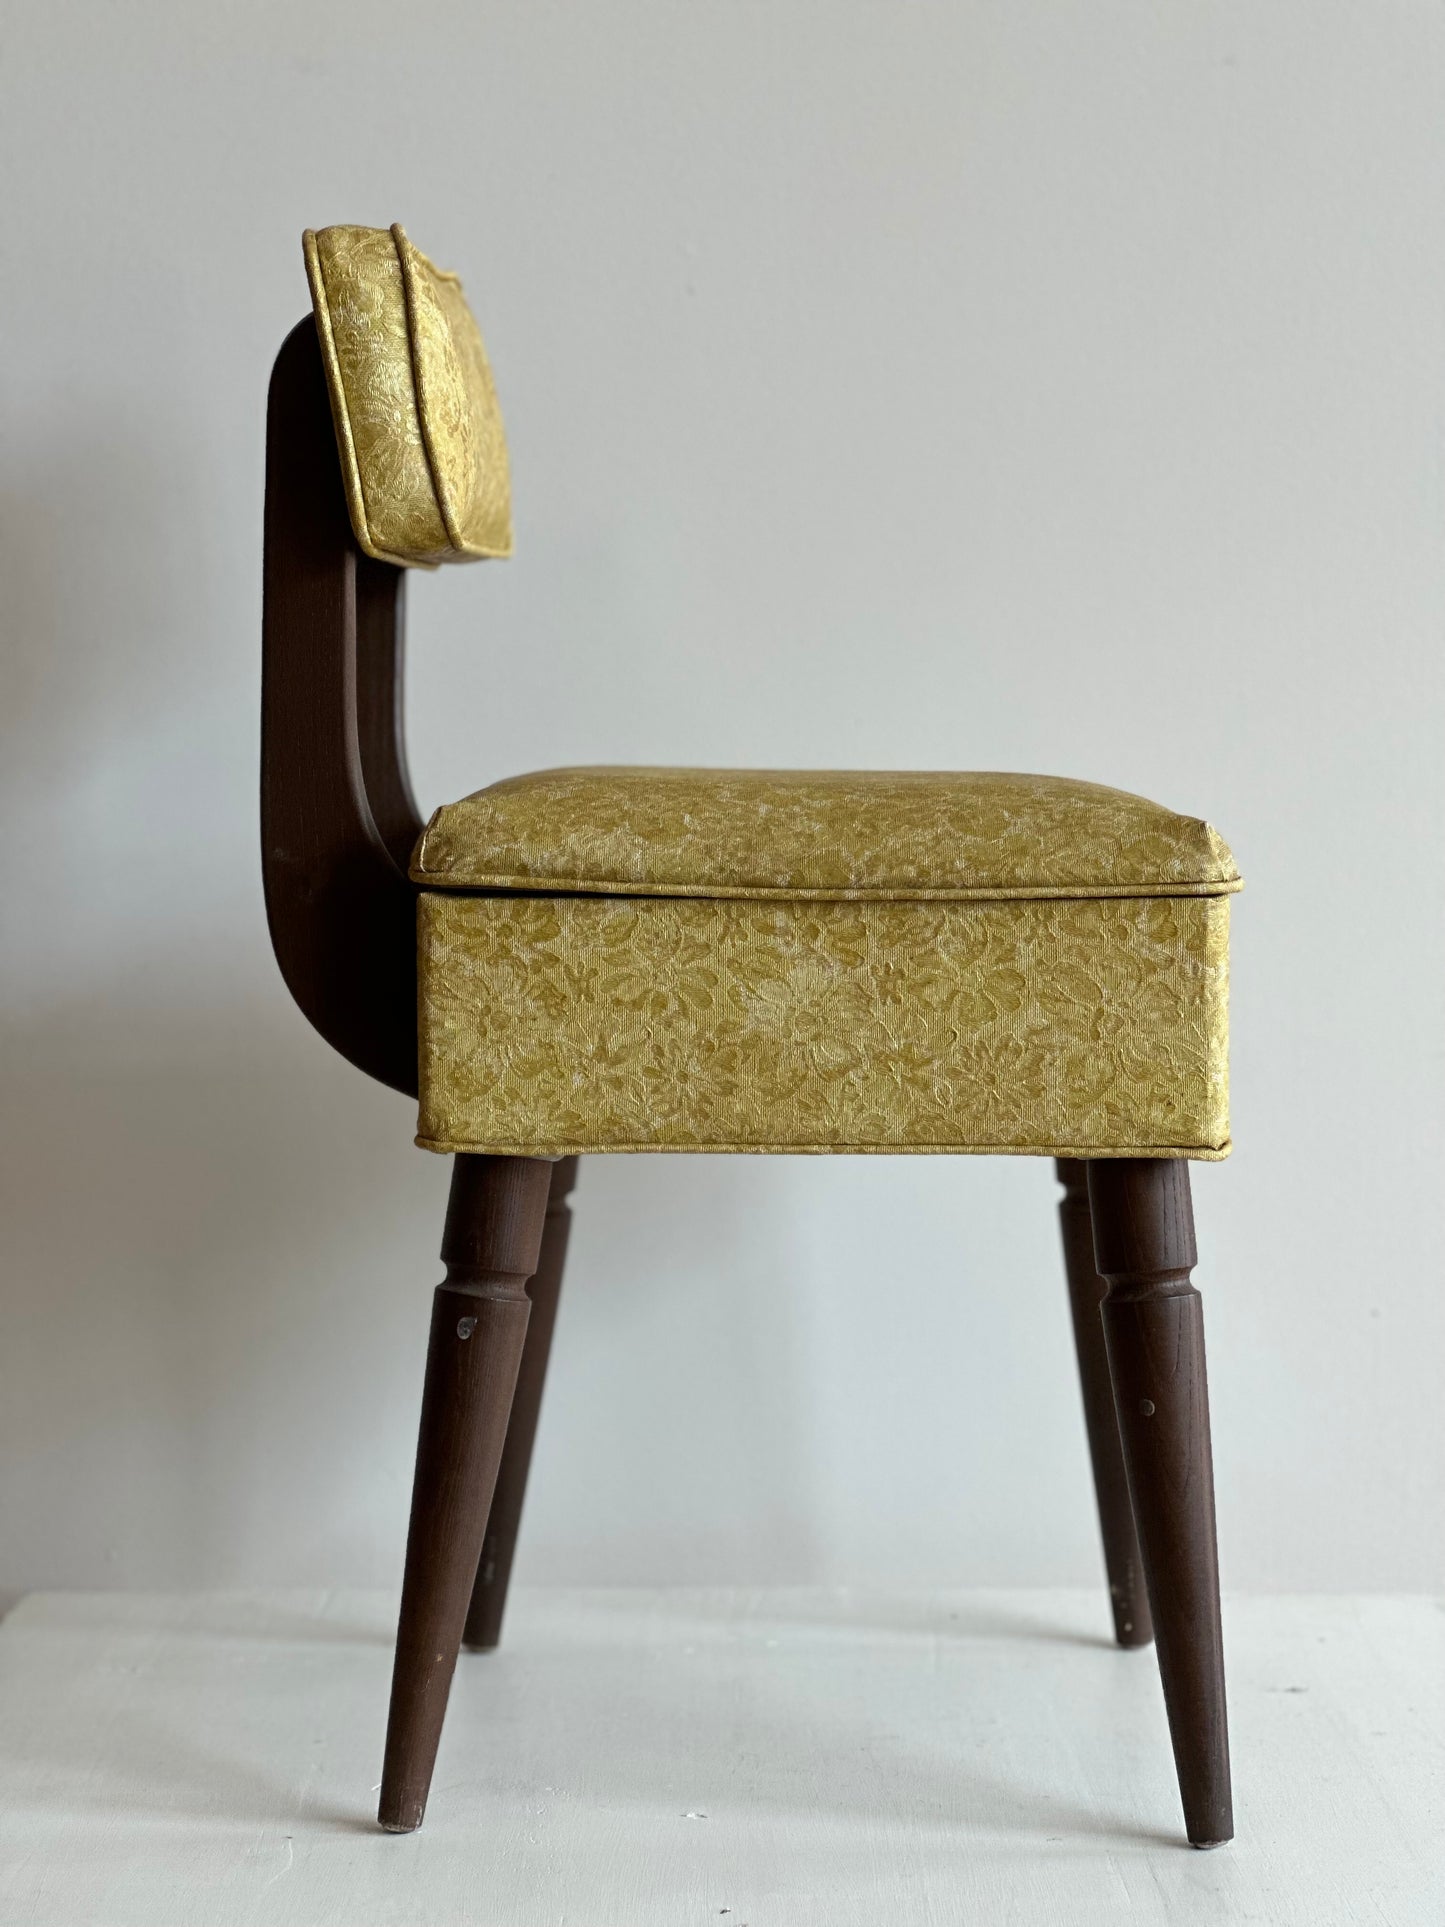 Yellow Floral Sewing Chair